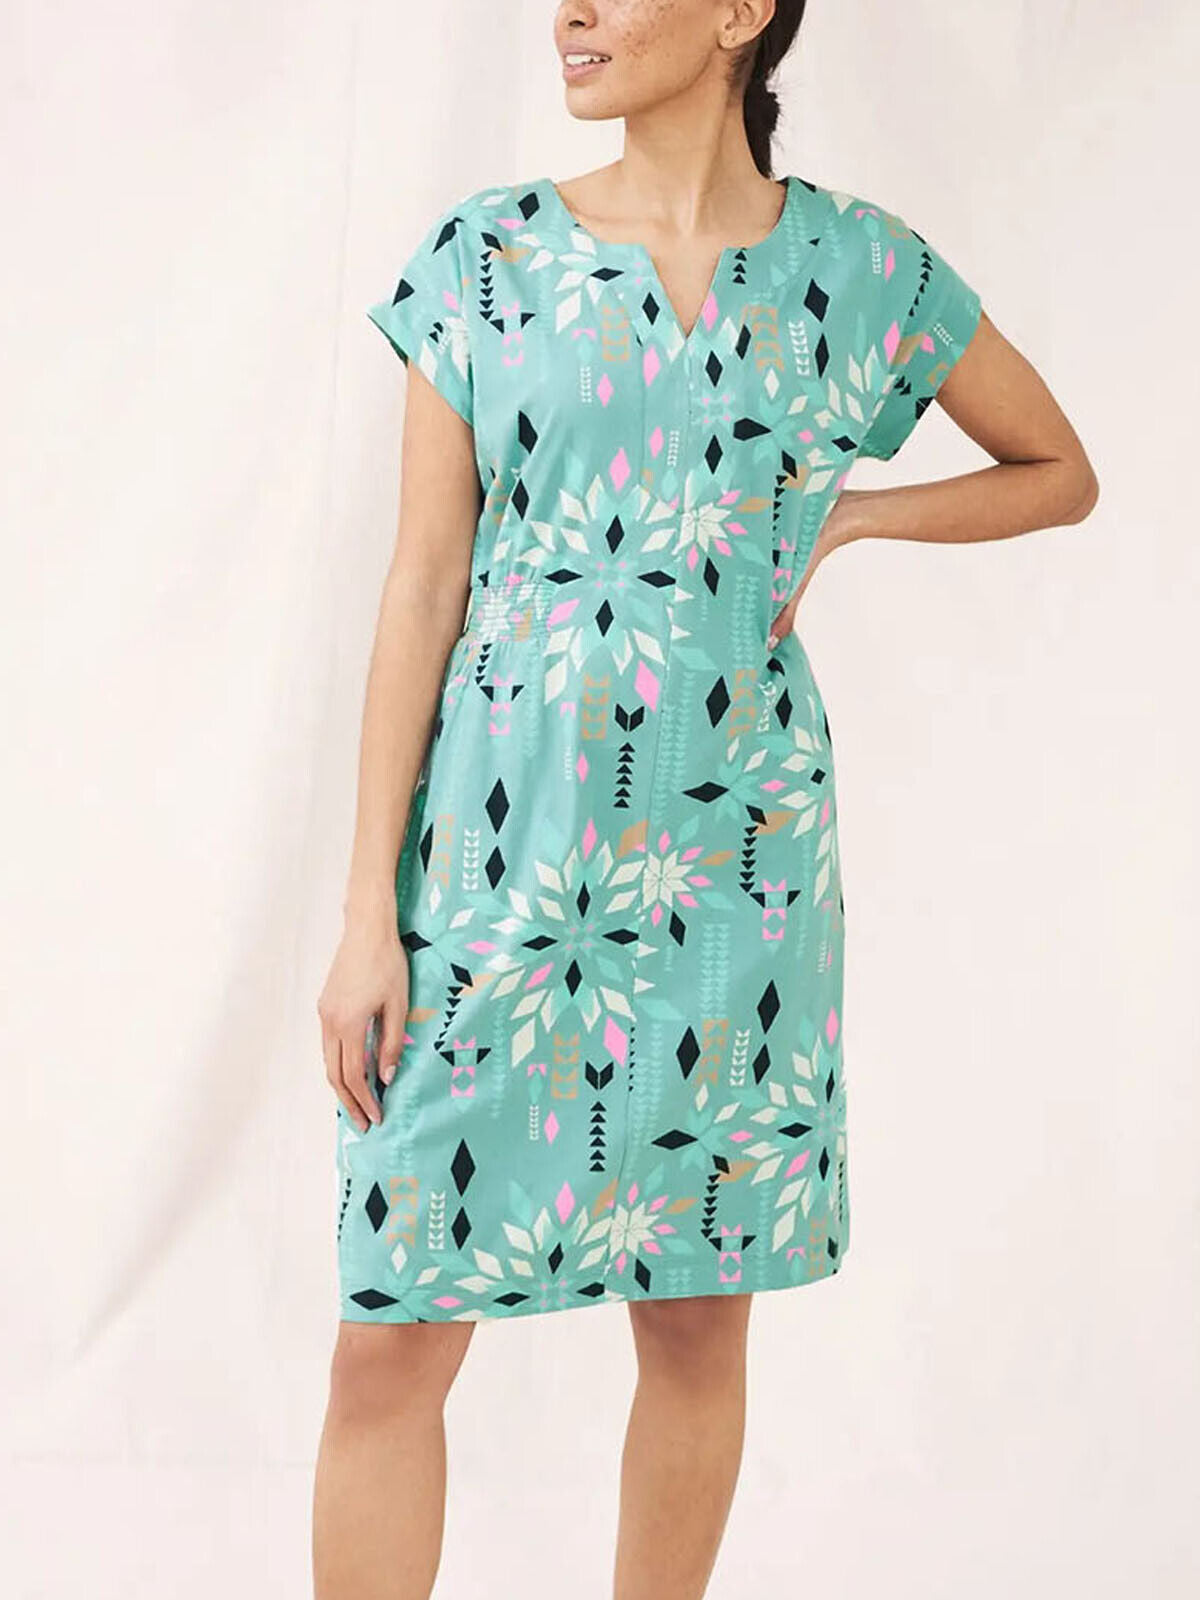 EX WHITE STUFF Teal Penny Cotton Jersey Dress Sizes 8 10 12 14 16 18 20 RRP £55